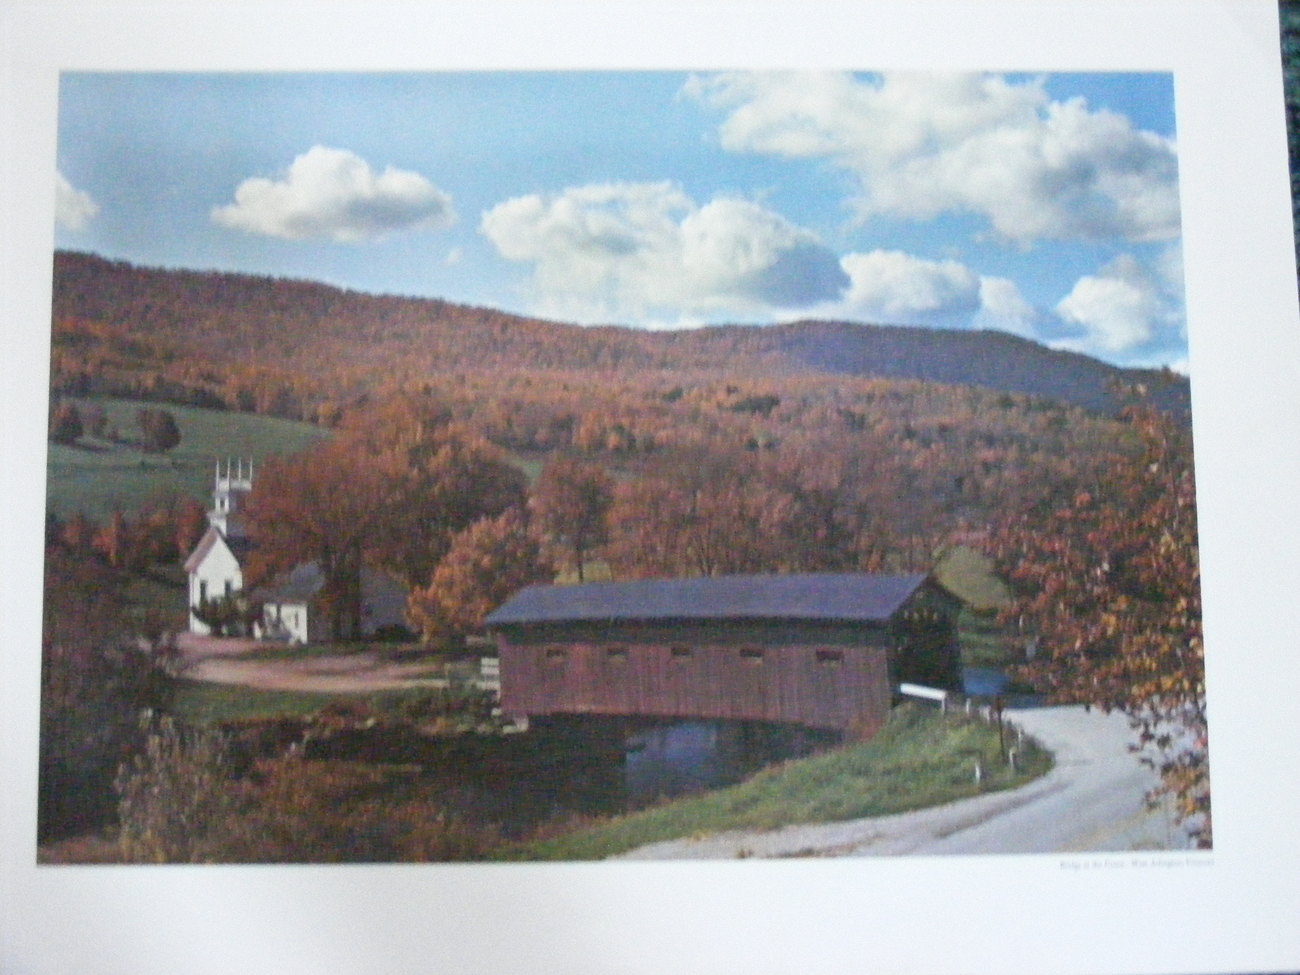 Primary image for Fall Color Landscape Poster, 14"x20", Covered Bridge, West A